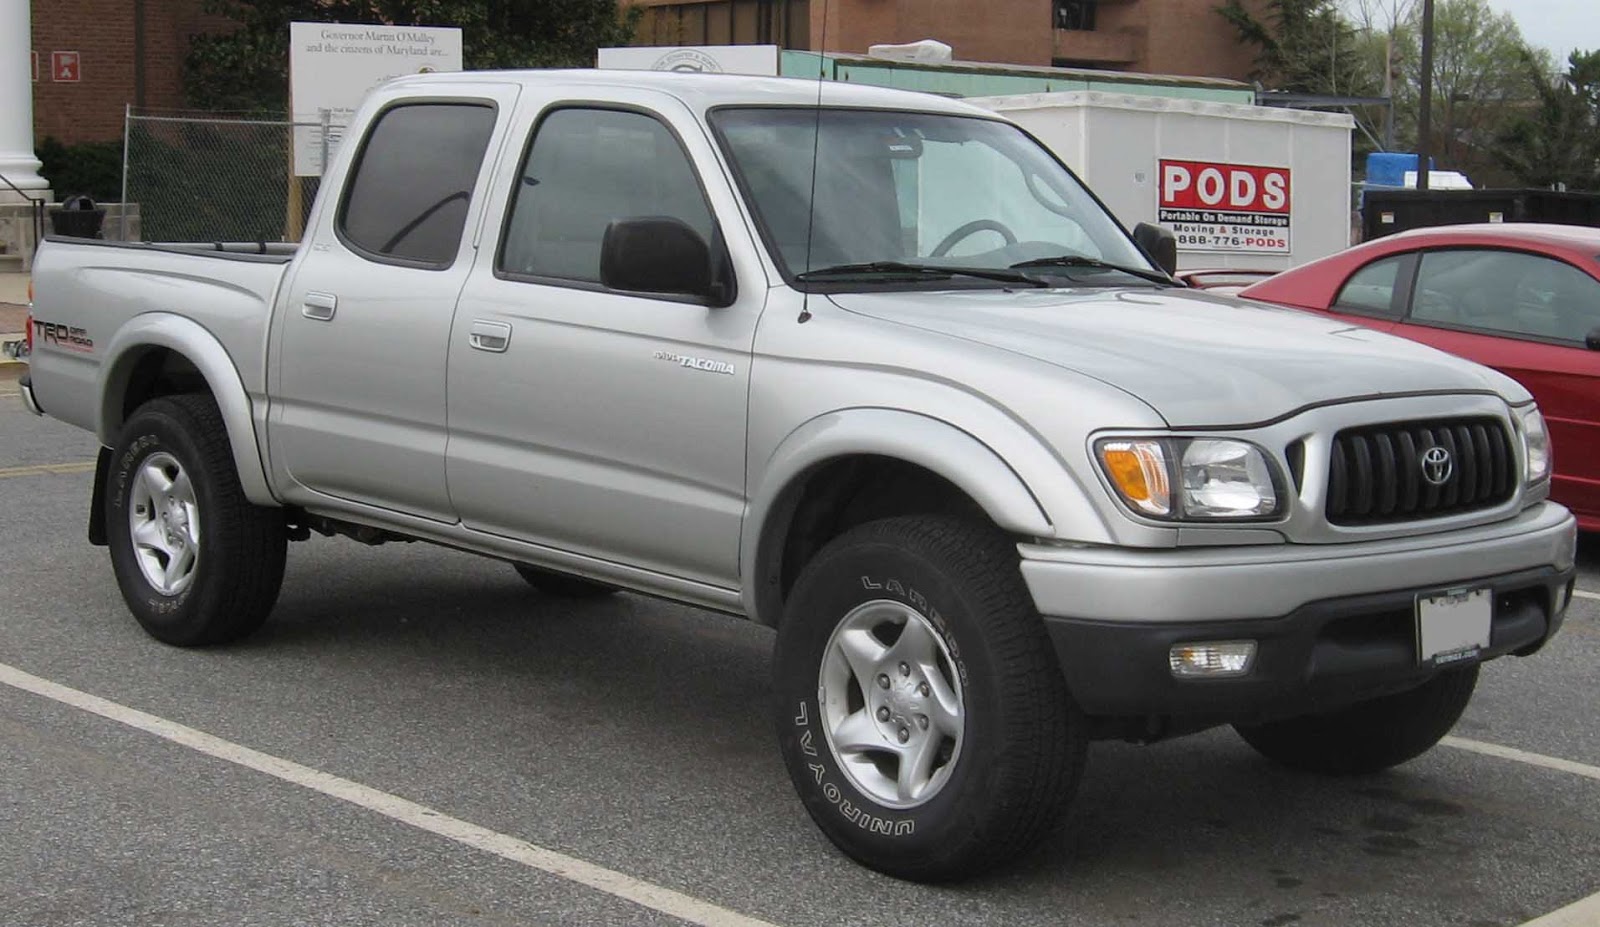 New Auto and Cars: Toyota Tacoma car model sale value in 2013